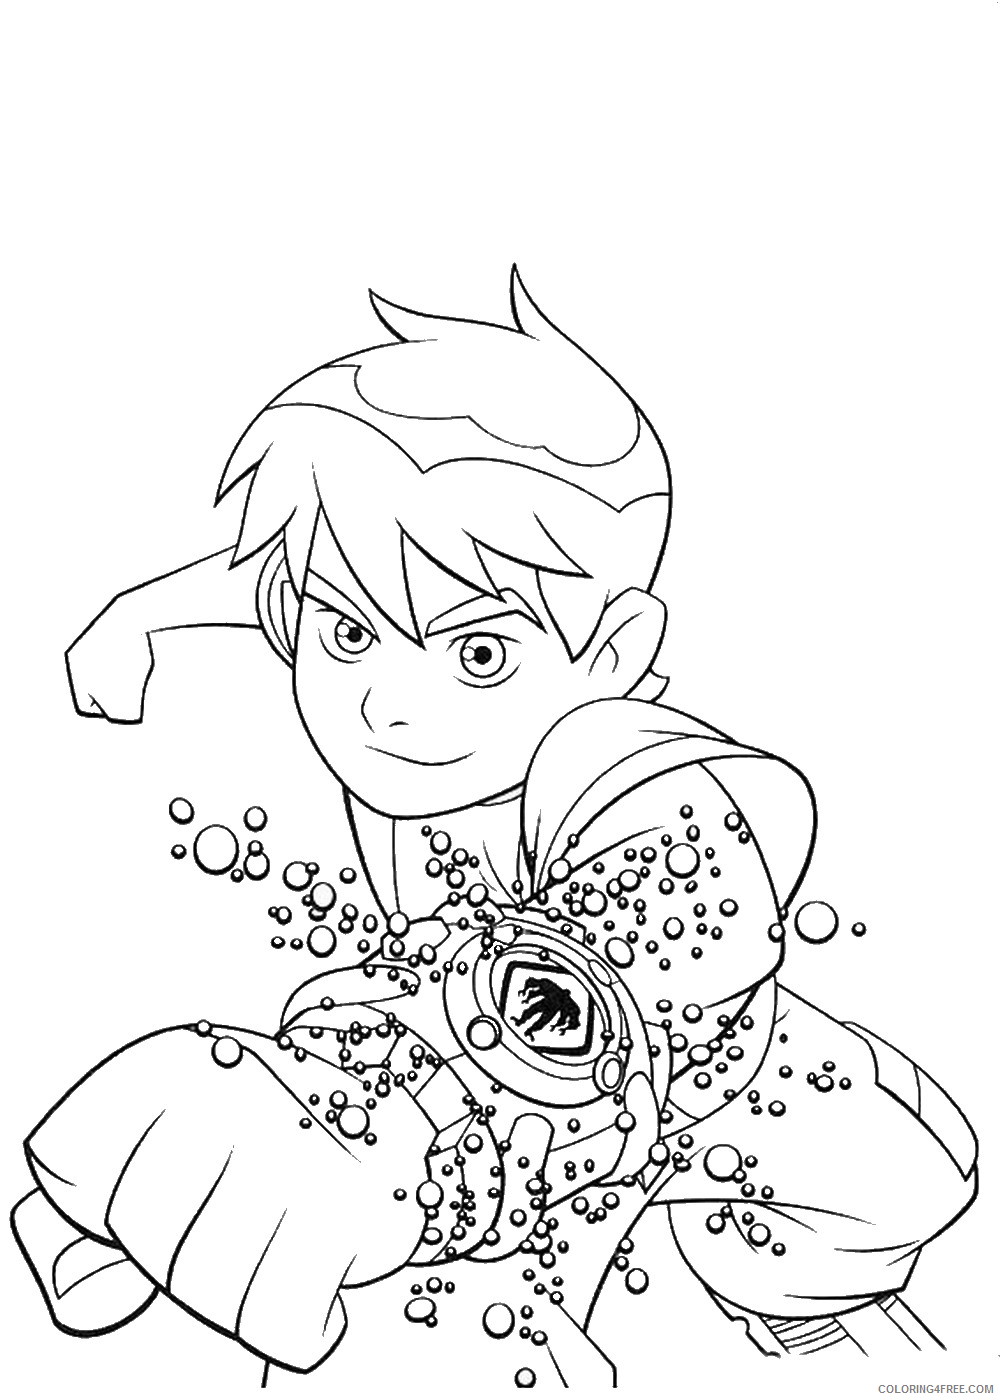 Ben 10 Coloring Pages Cartoons ben 10 16 Printable 2020 1213 Coloring4free